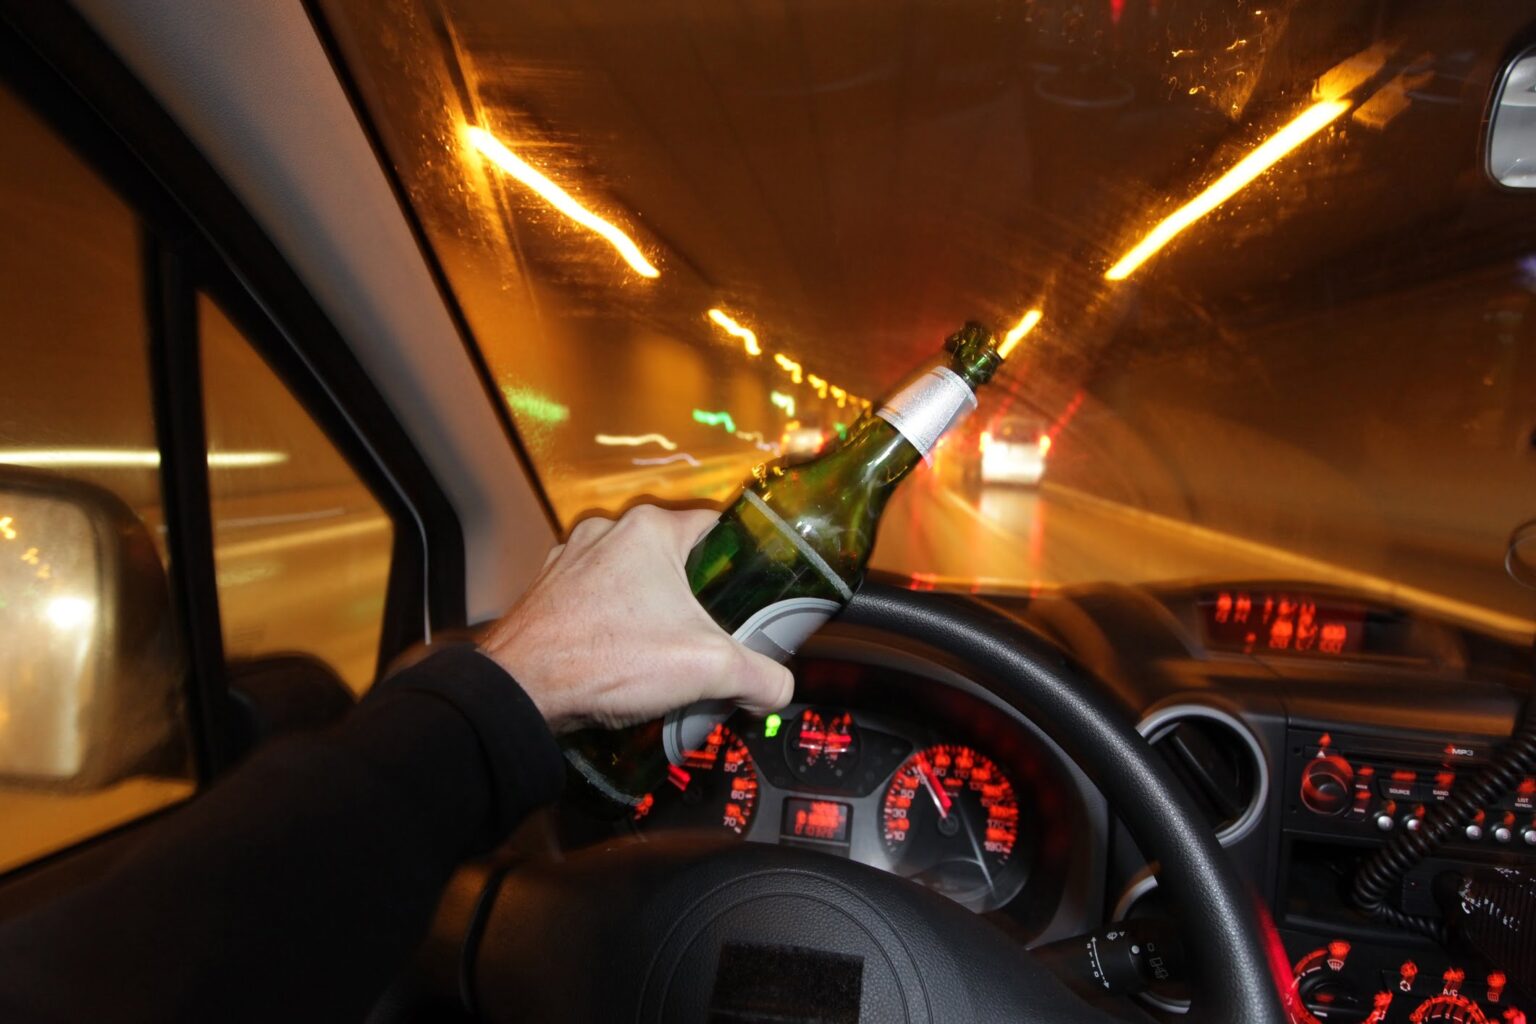 Alcohol Detection Systems in Cars